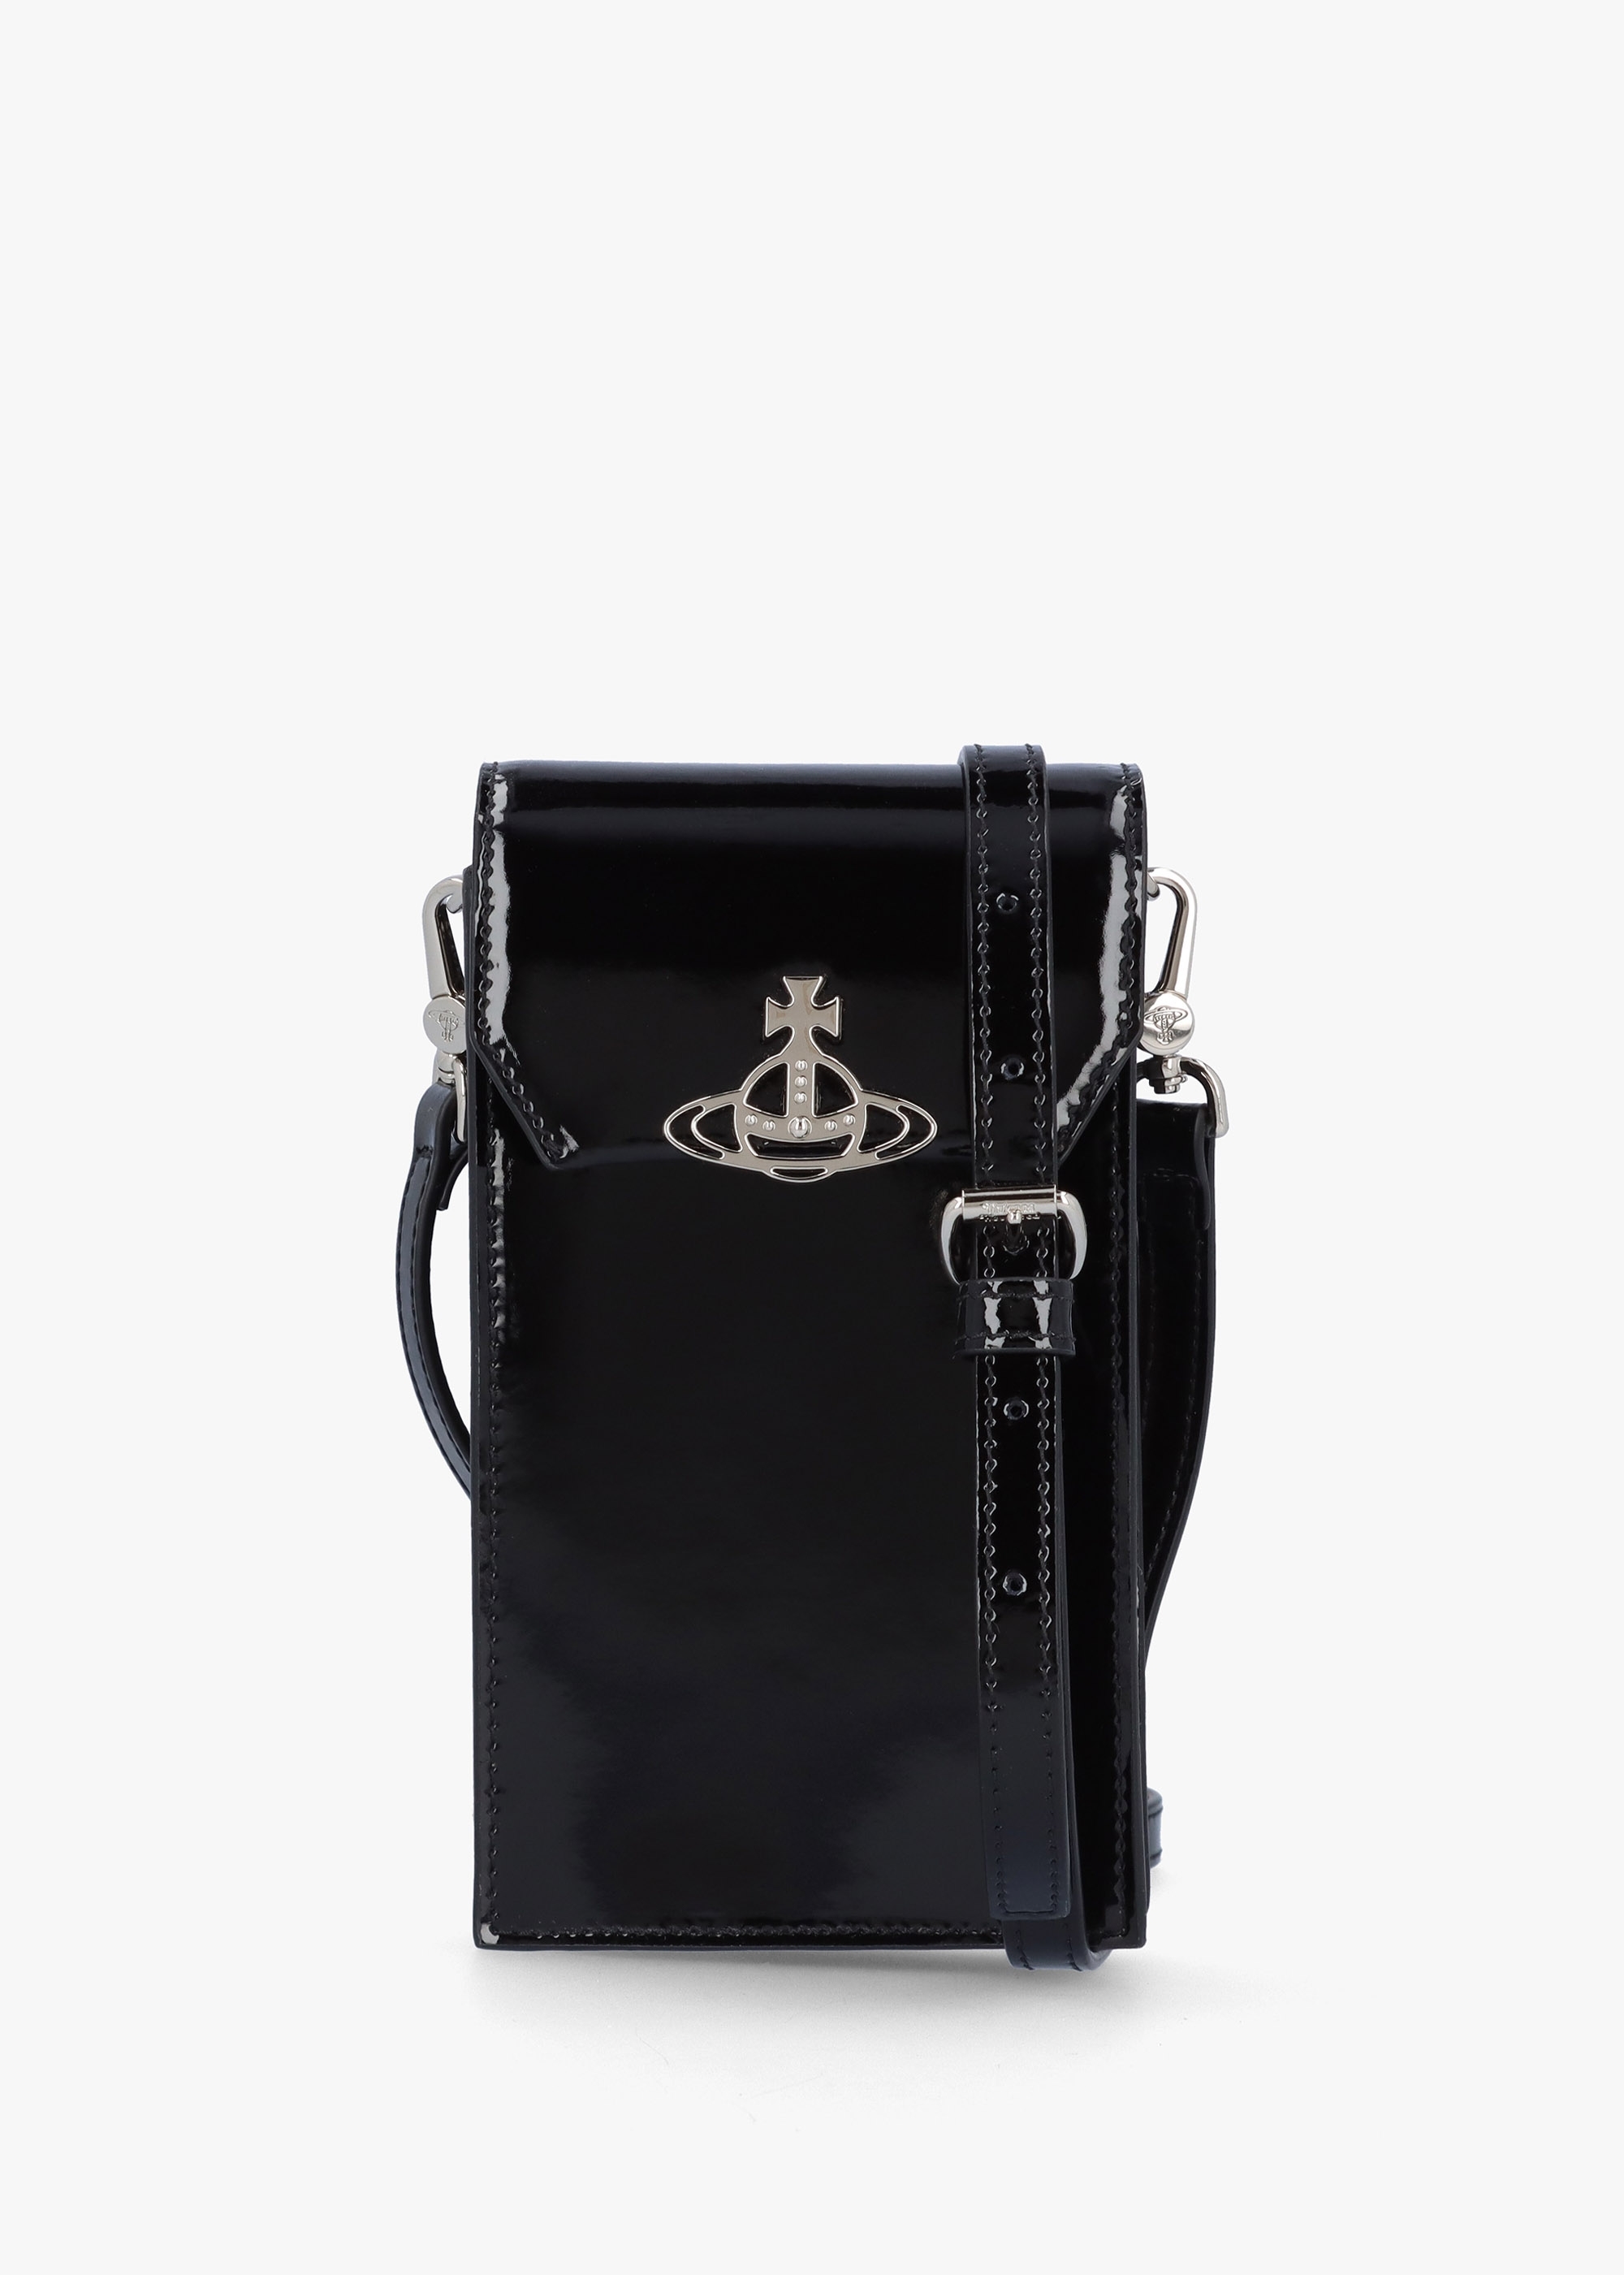 vivienne-westwood-womens-leather-phone-bag-in-black-patent